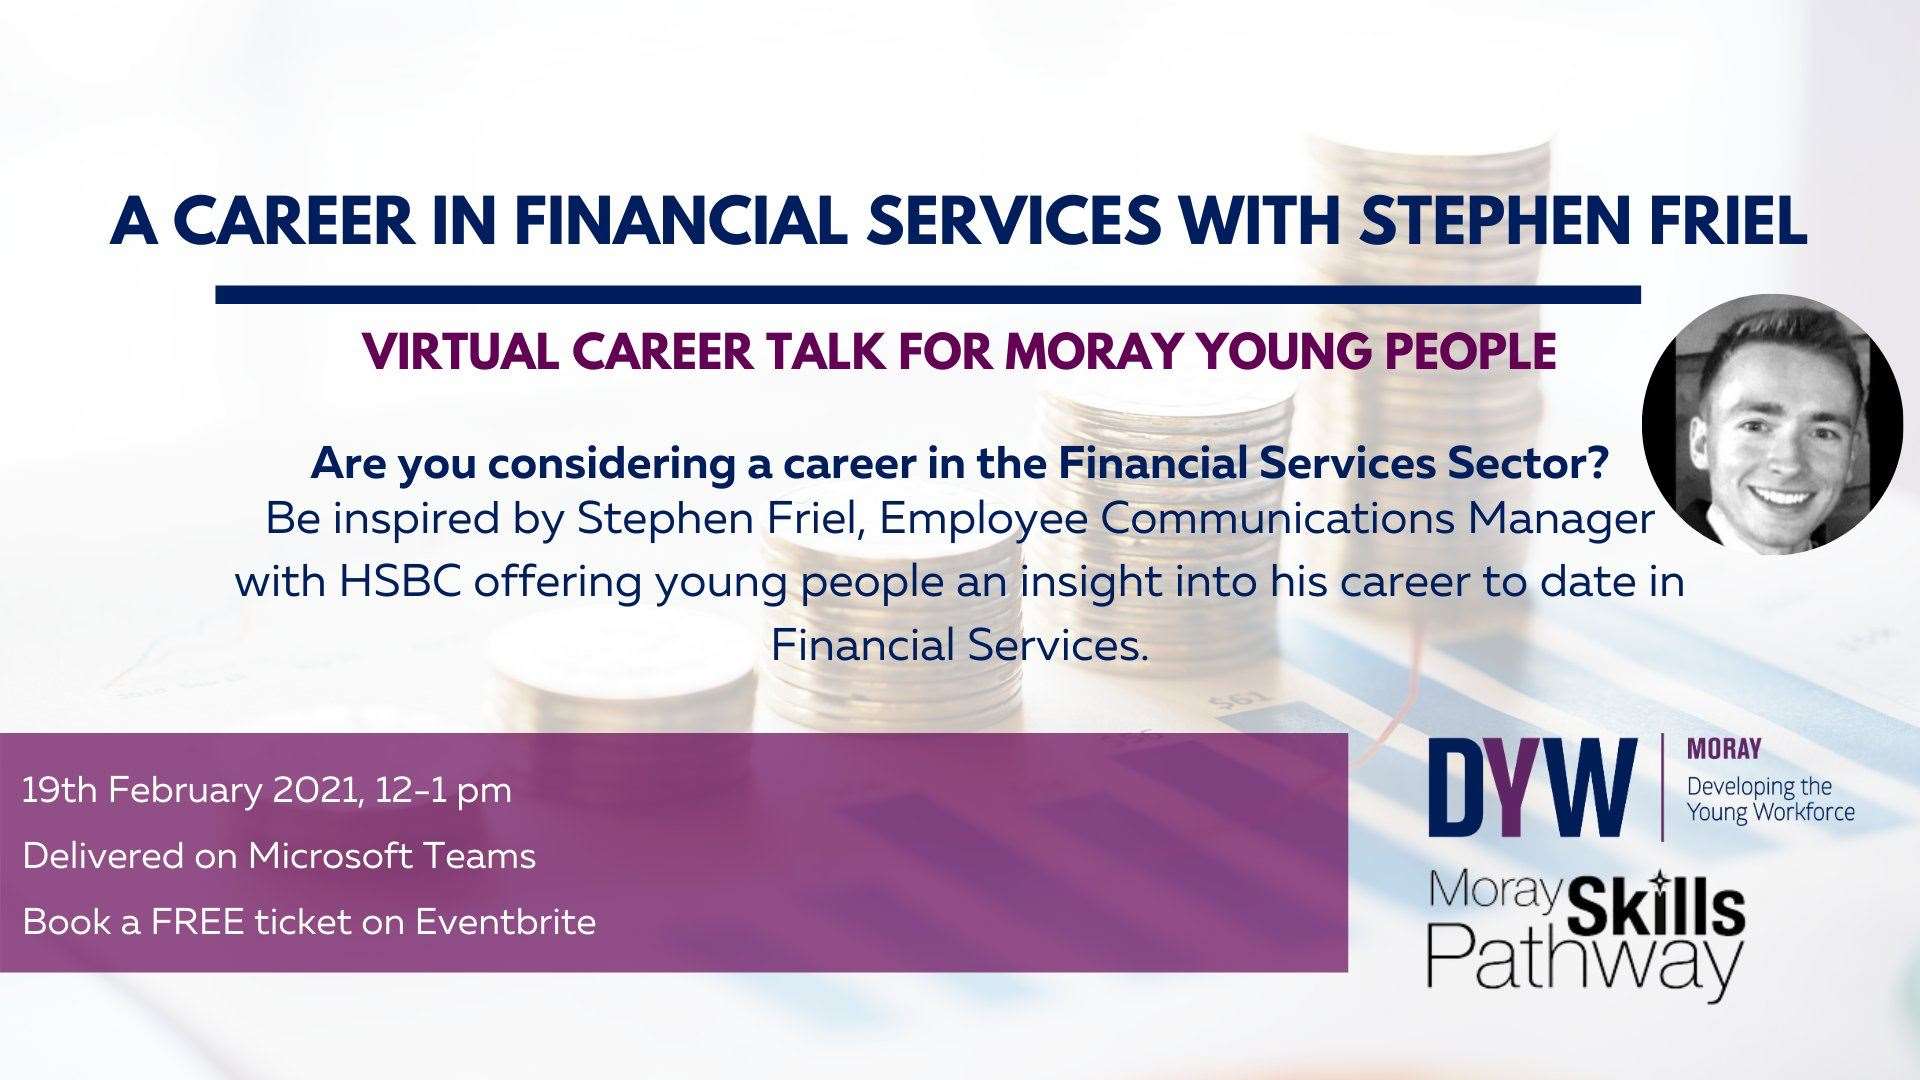 Financial sector opportunities beckon for young people this Friday. Picture: DYW